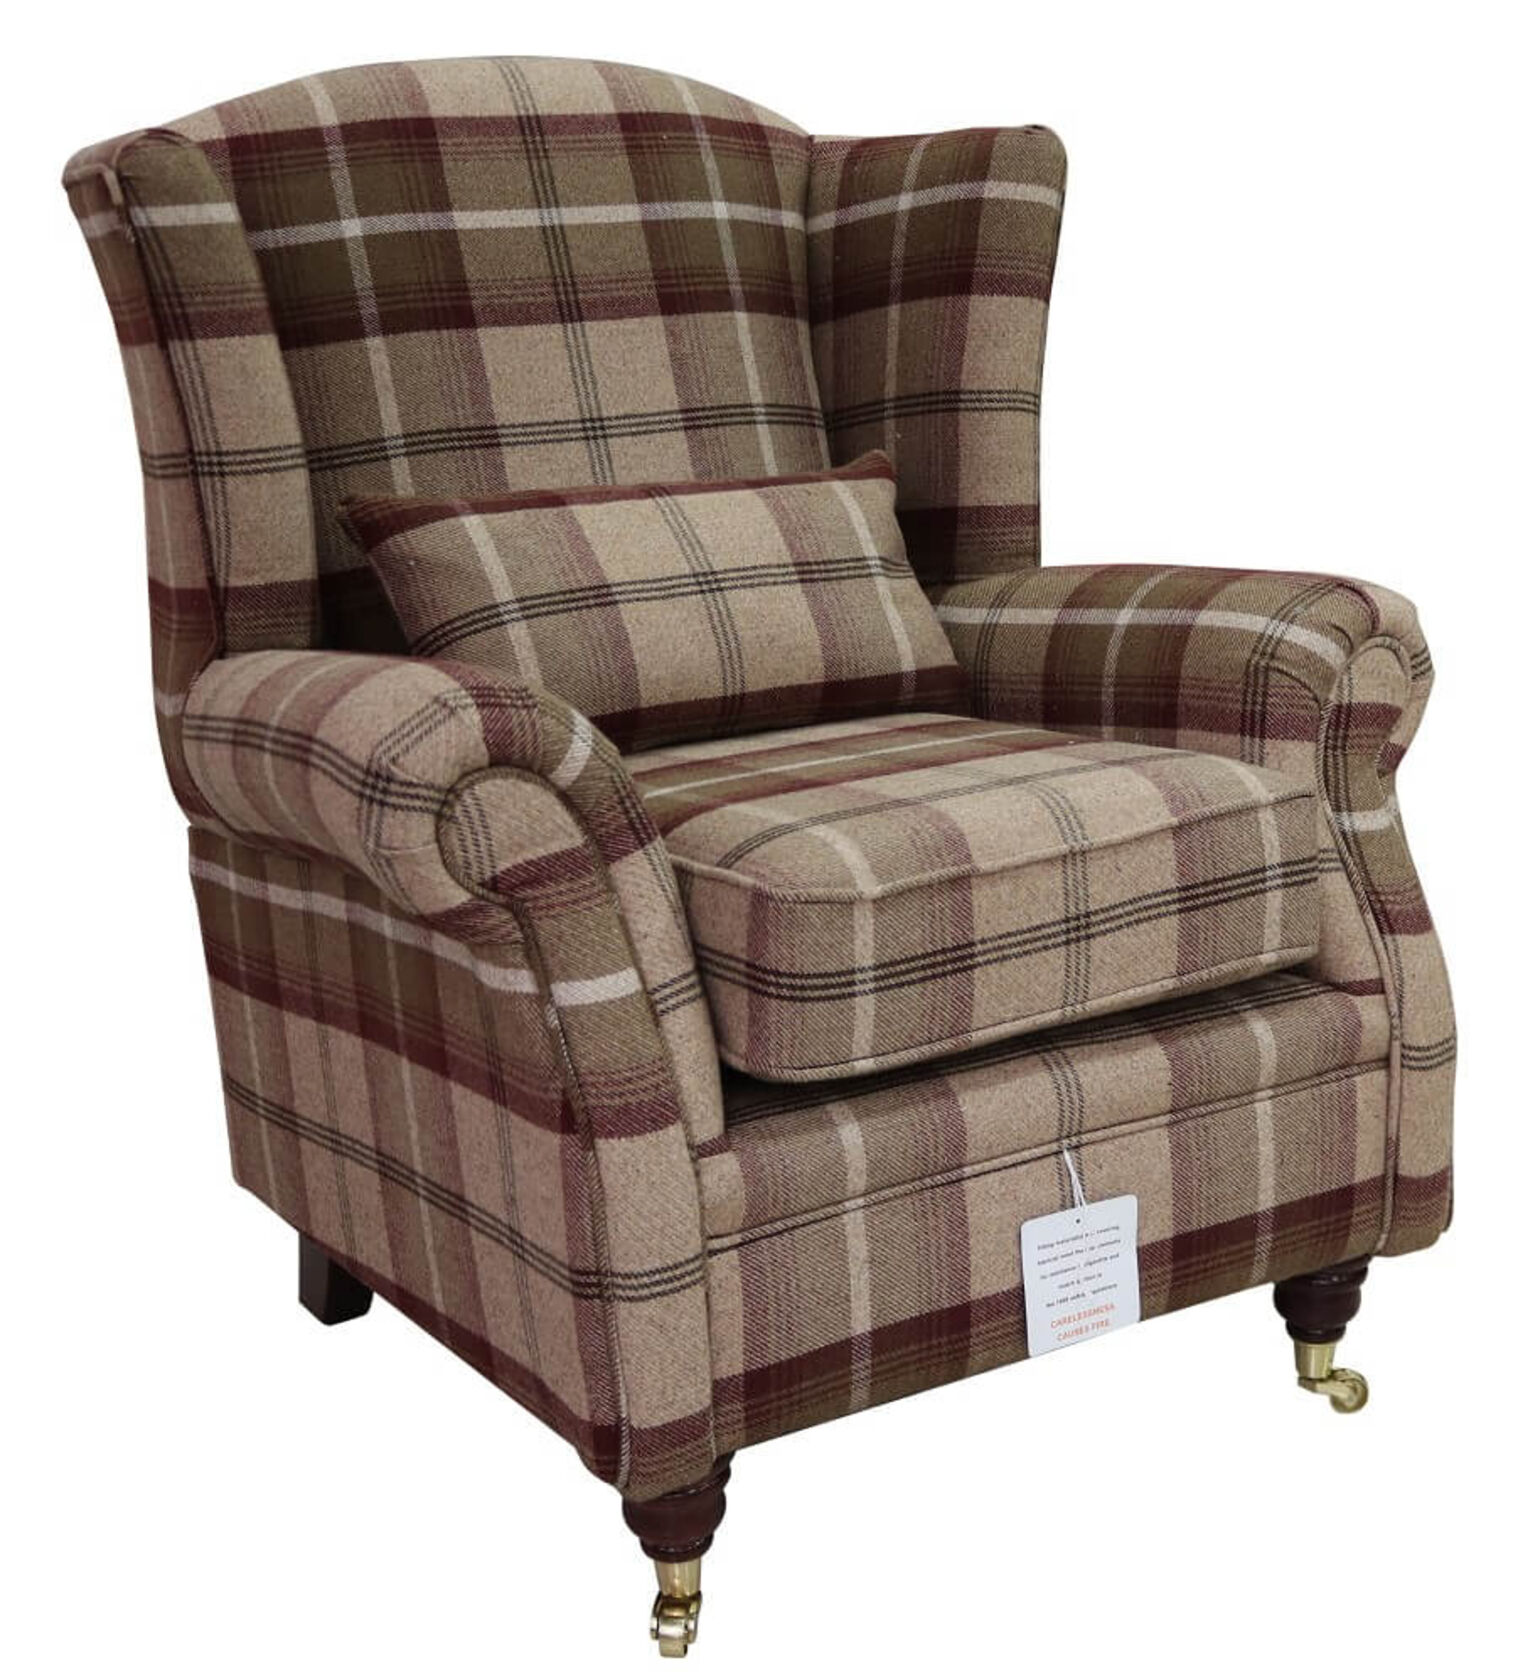 Wing Chairs Fireside Chairs Uk Handcrafted From Designer Sofas 4u